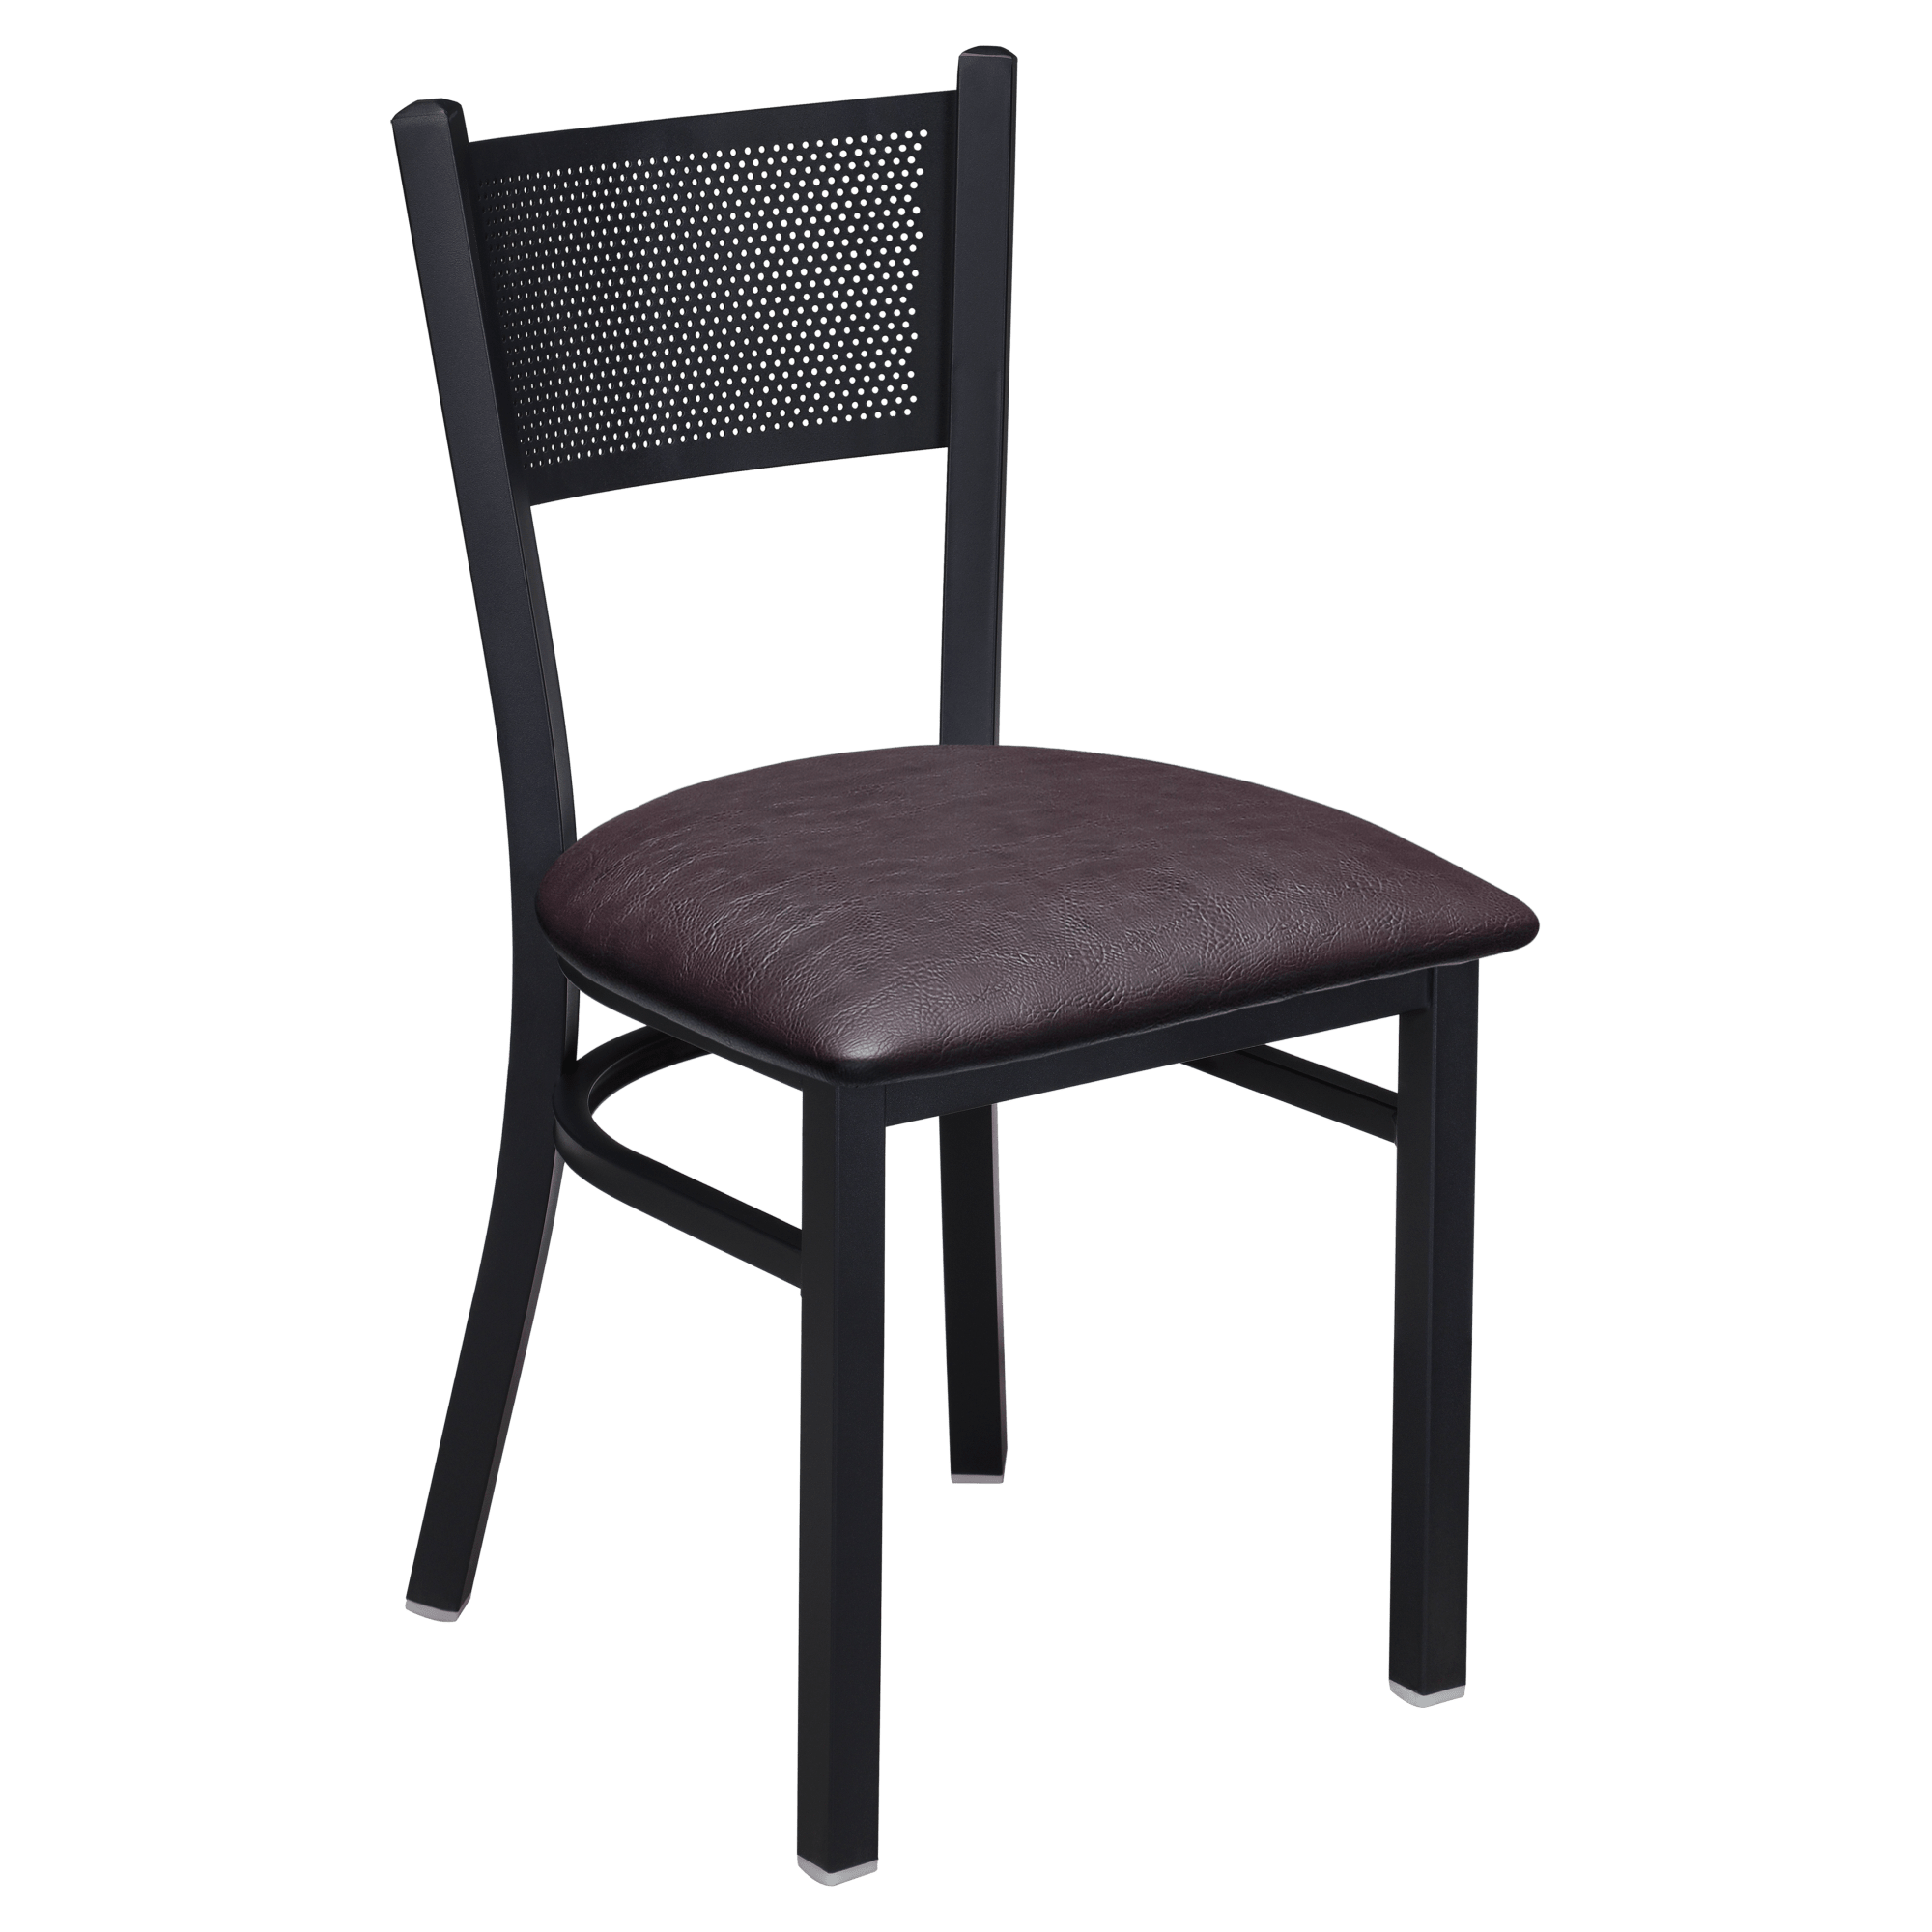 Checker Back Metal Chair with Checker Back Metal Chair